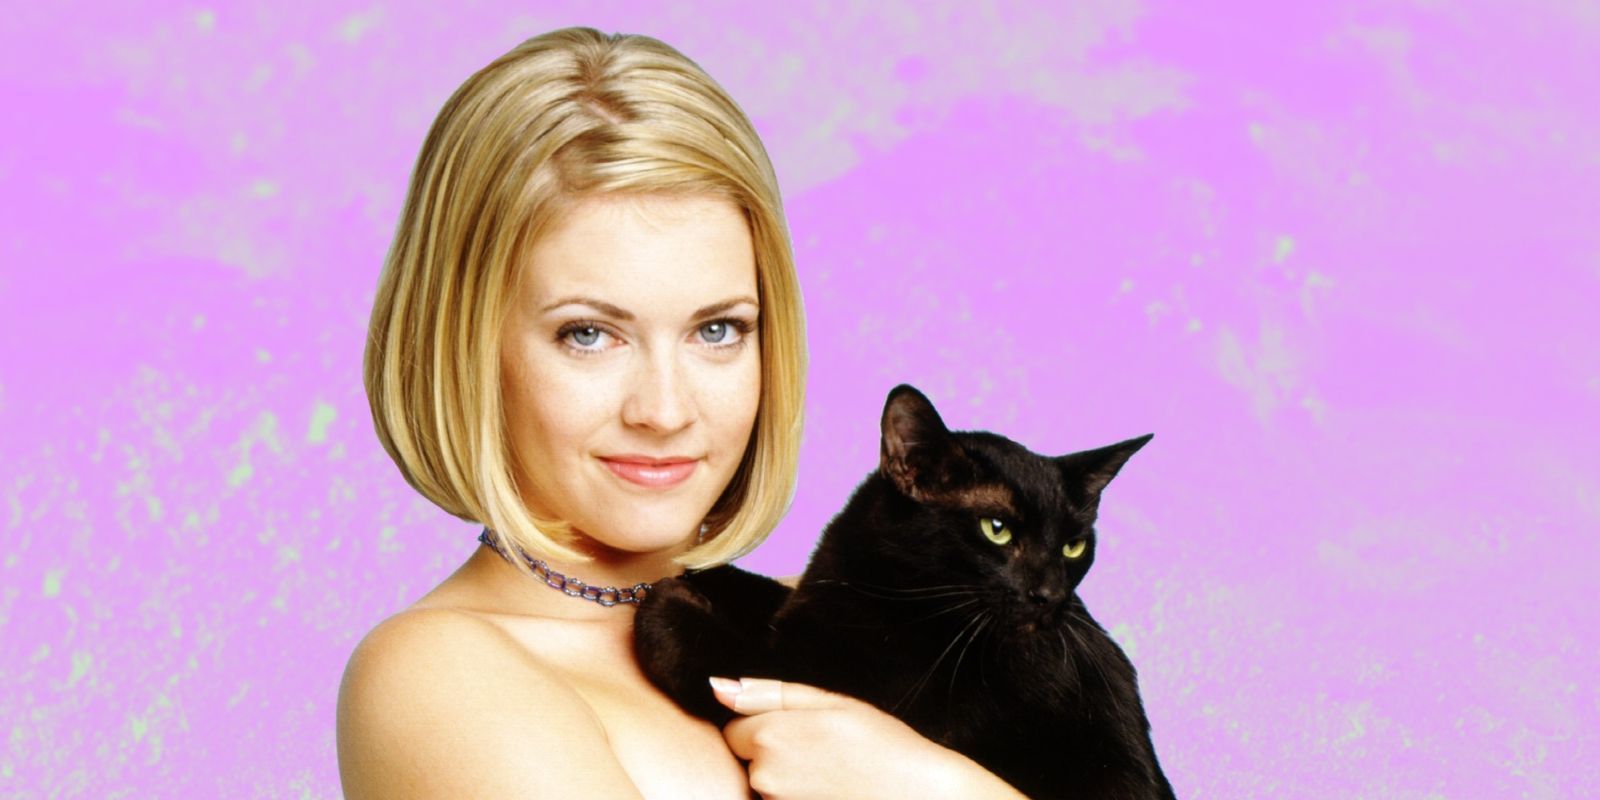 Sabrina and her cat, Salem, in Sabrina the Teenage Witch